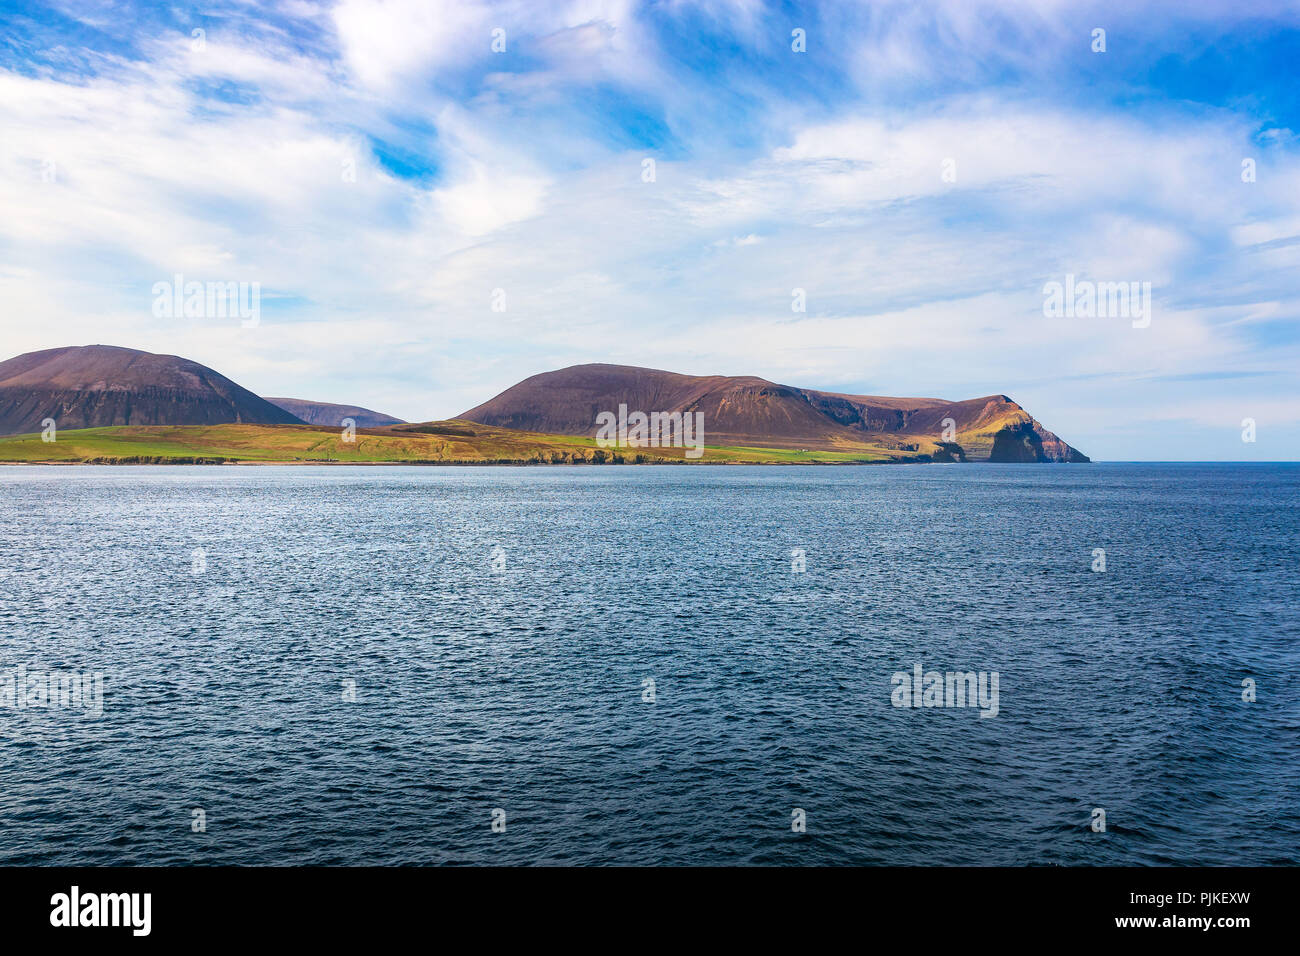 The Orkney Islands near Stromness, taken from the ship Stock Photo